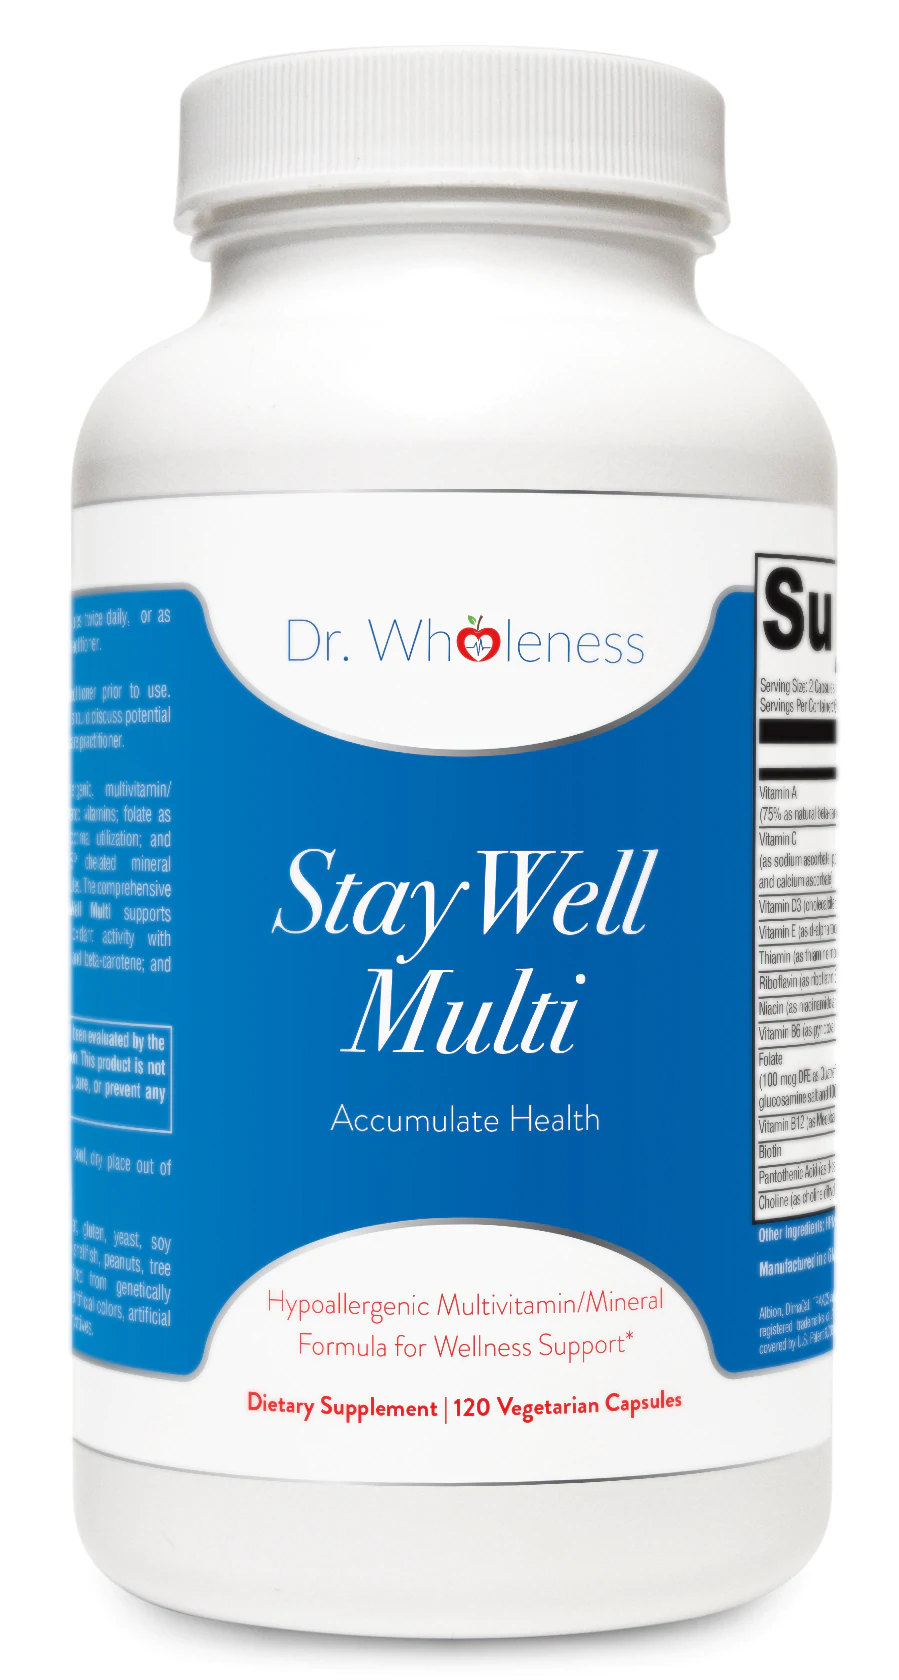 Stay Well Multi